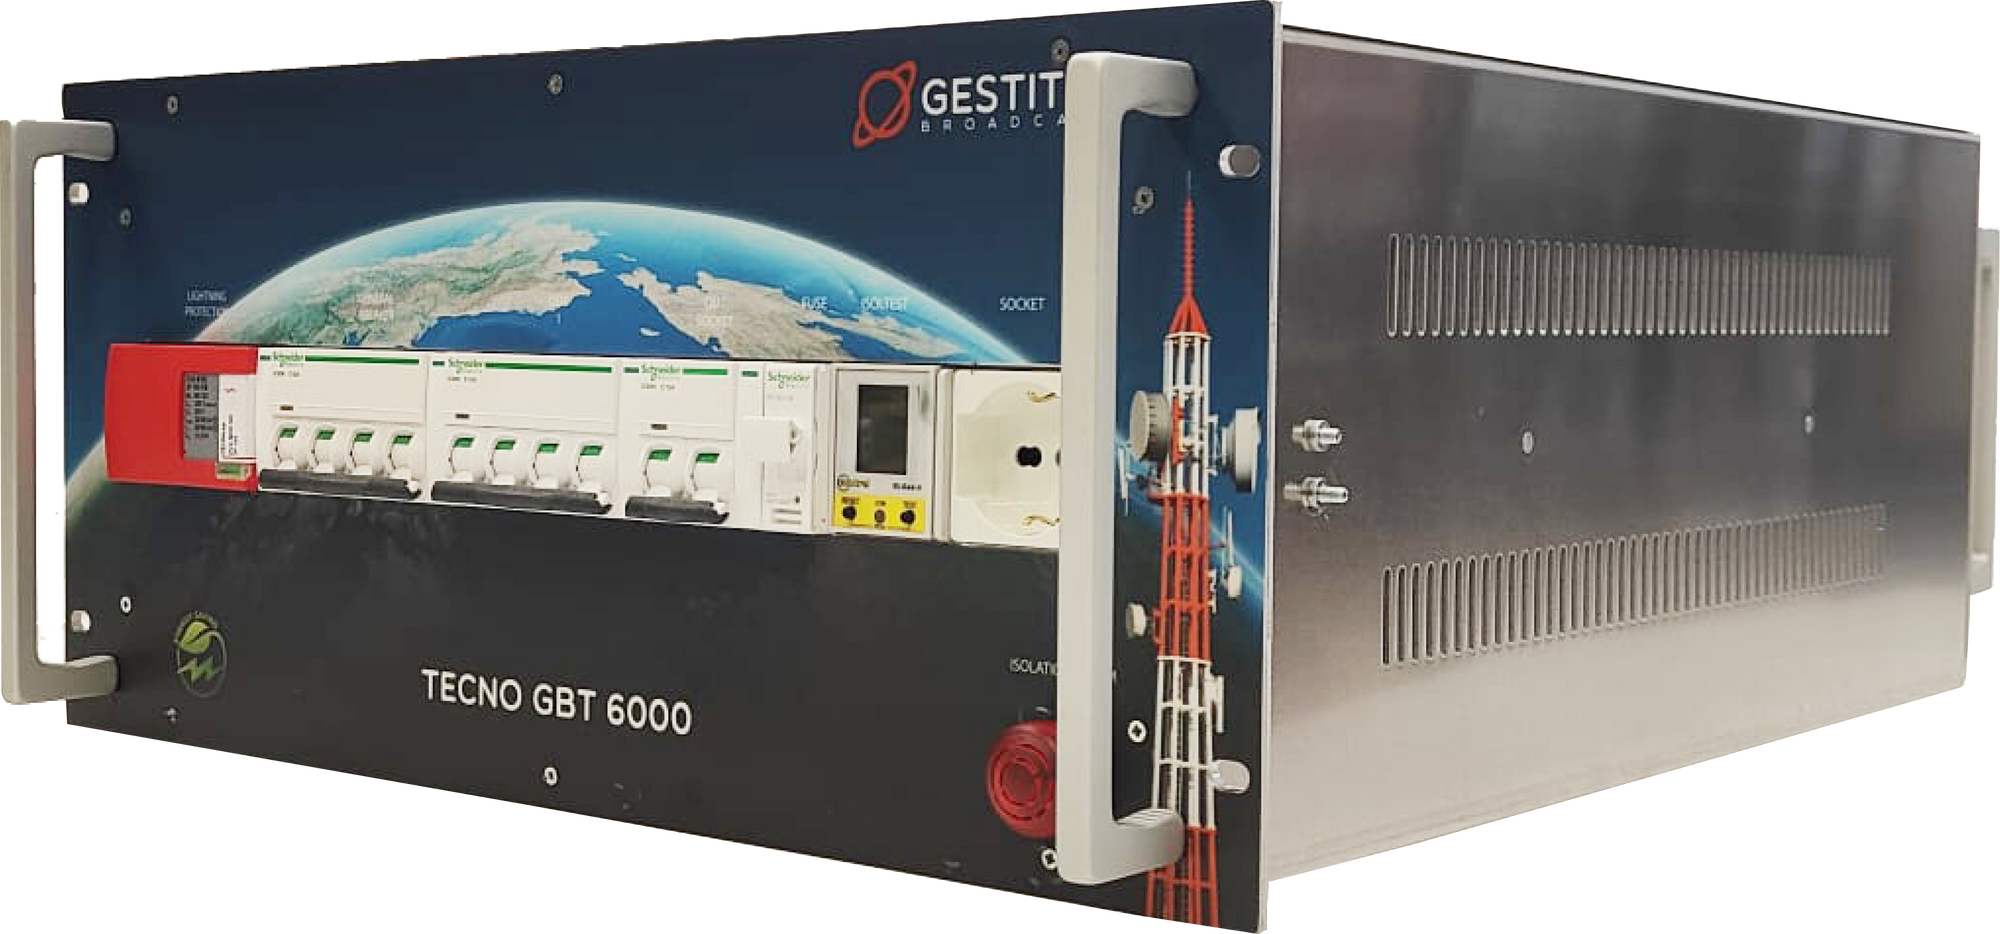 Electrical protection systems for TV and Radio Broadcast Equipment Triphase / Tecno GBT Gestitel